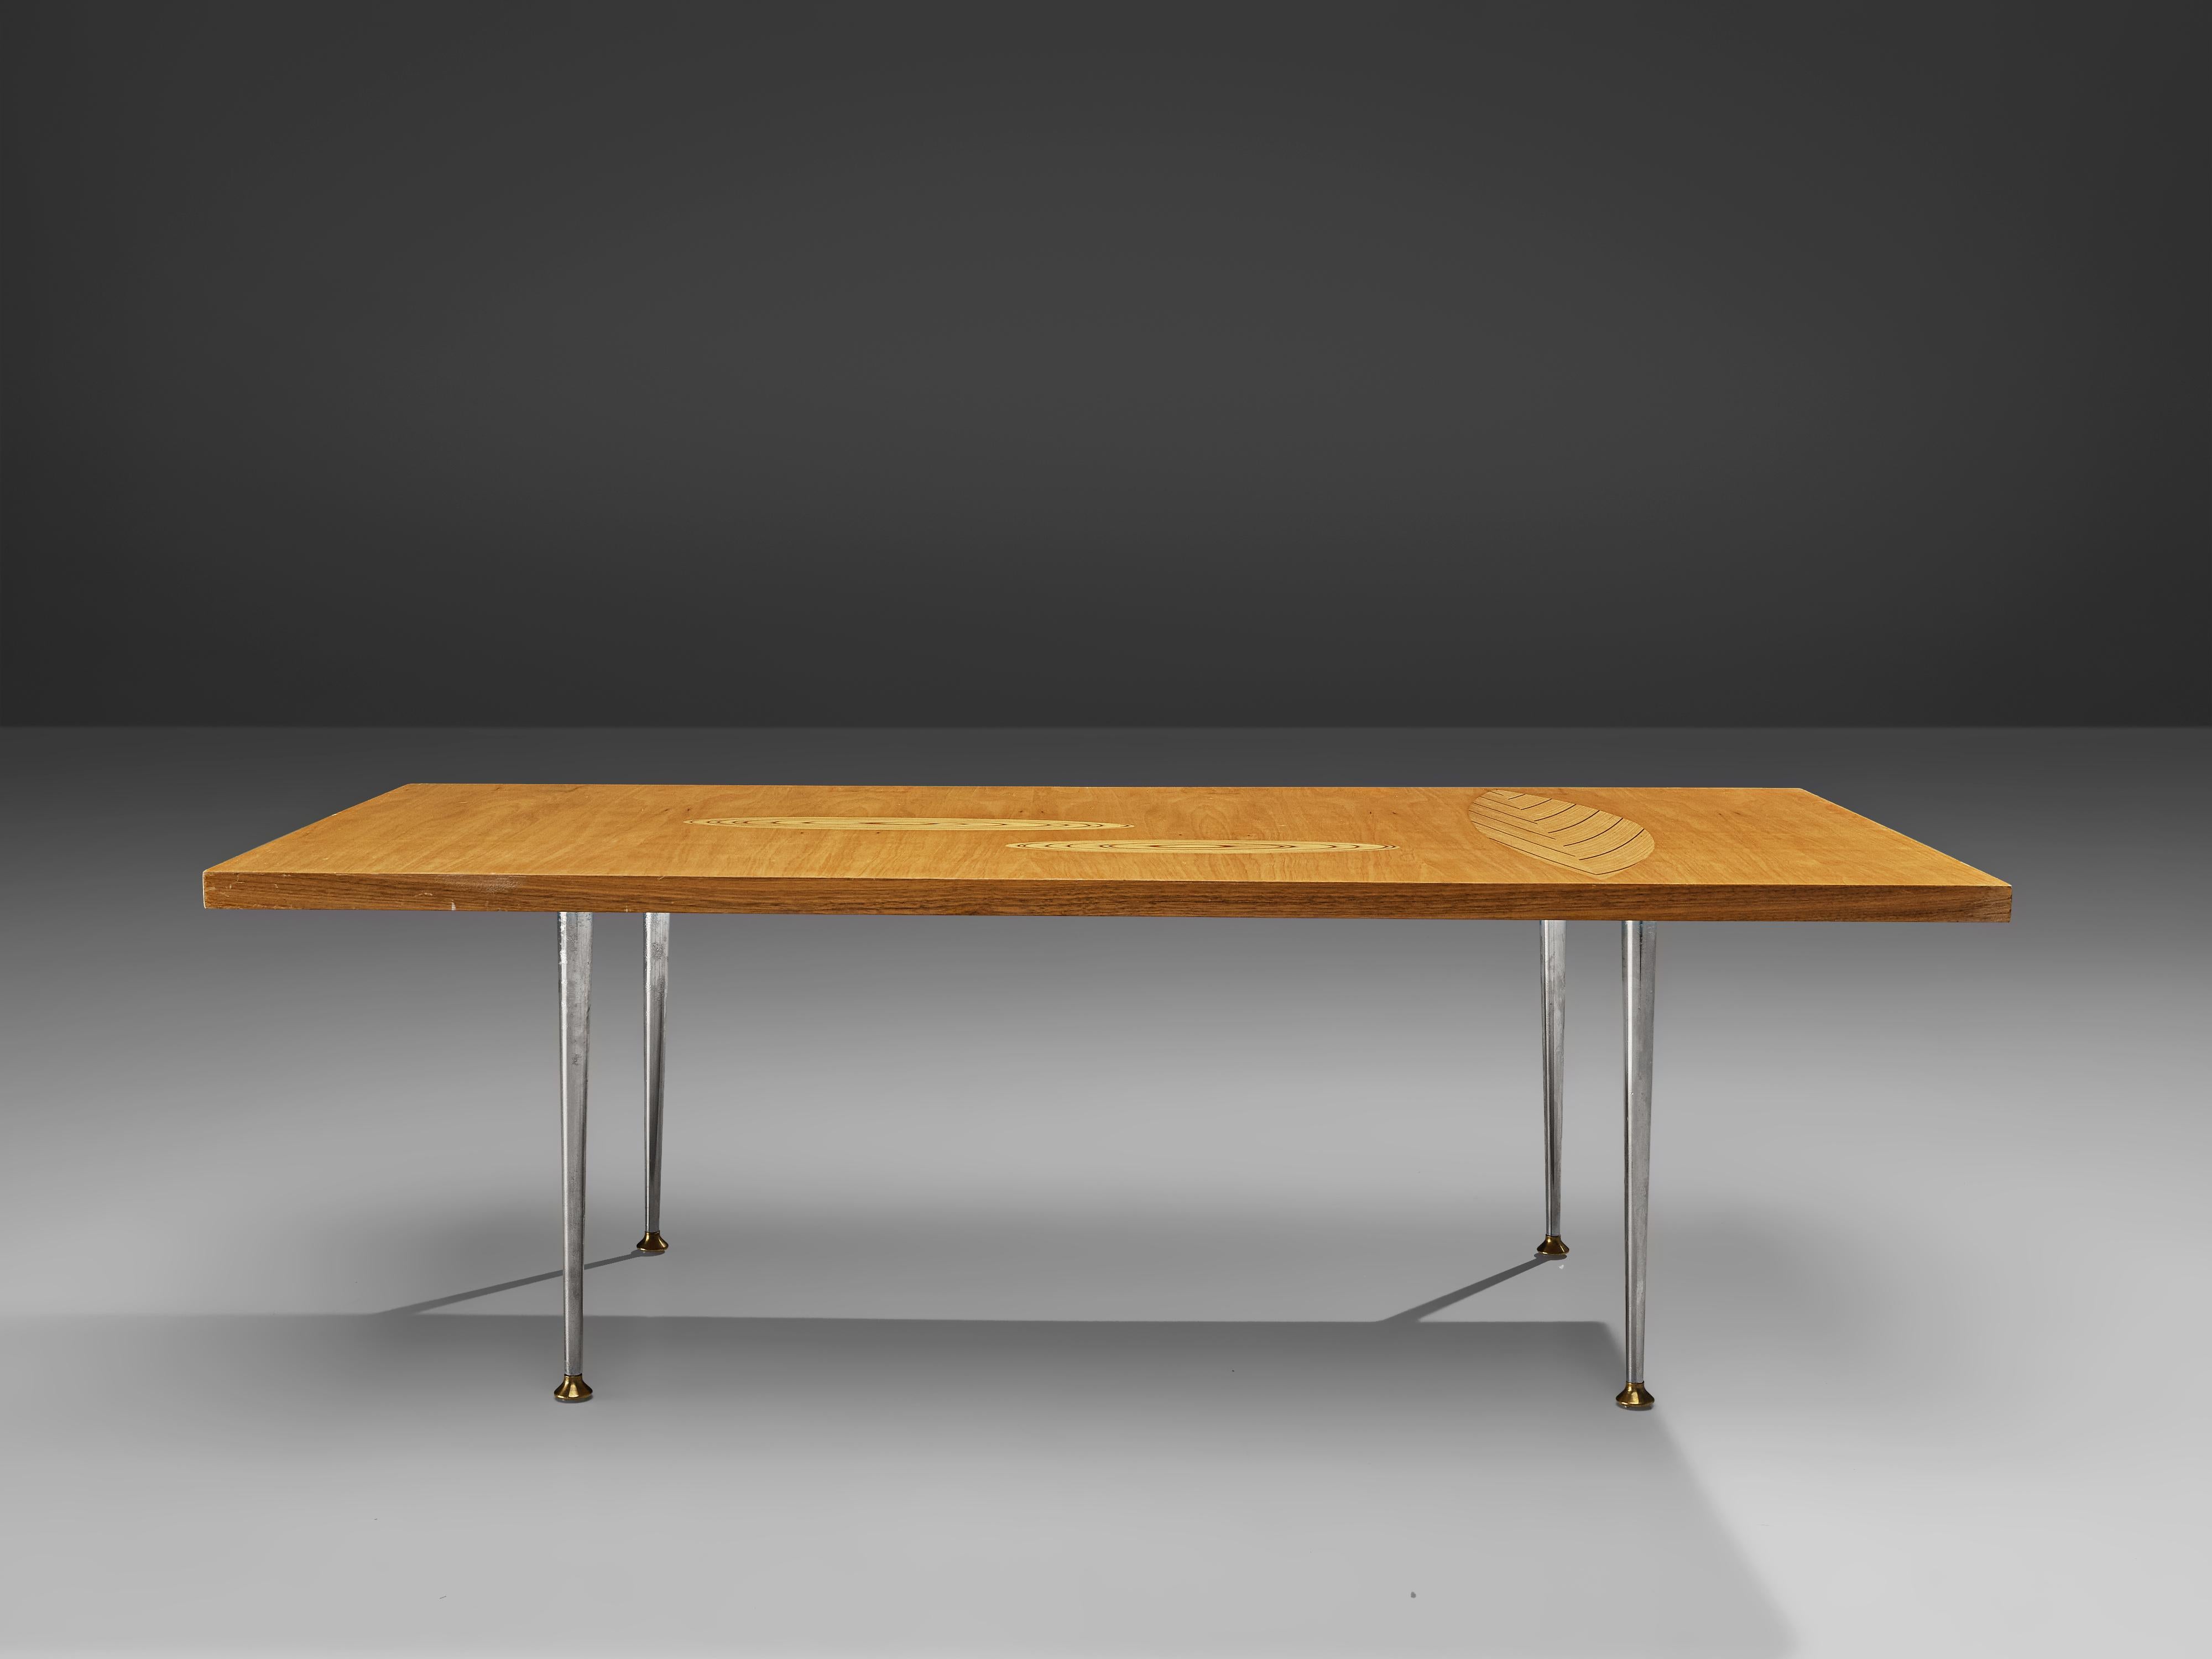 Tapio Wirkkala for Asko Coffee Table in Birch with Inlays For Sale 1